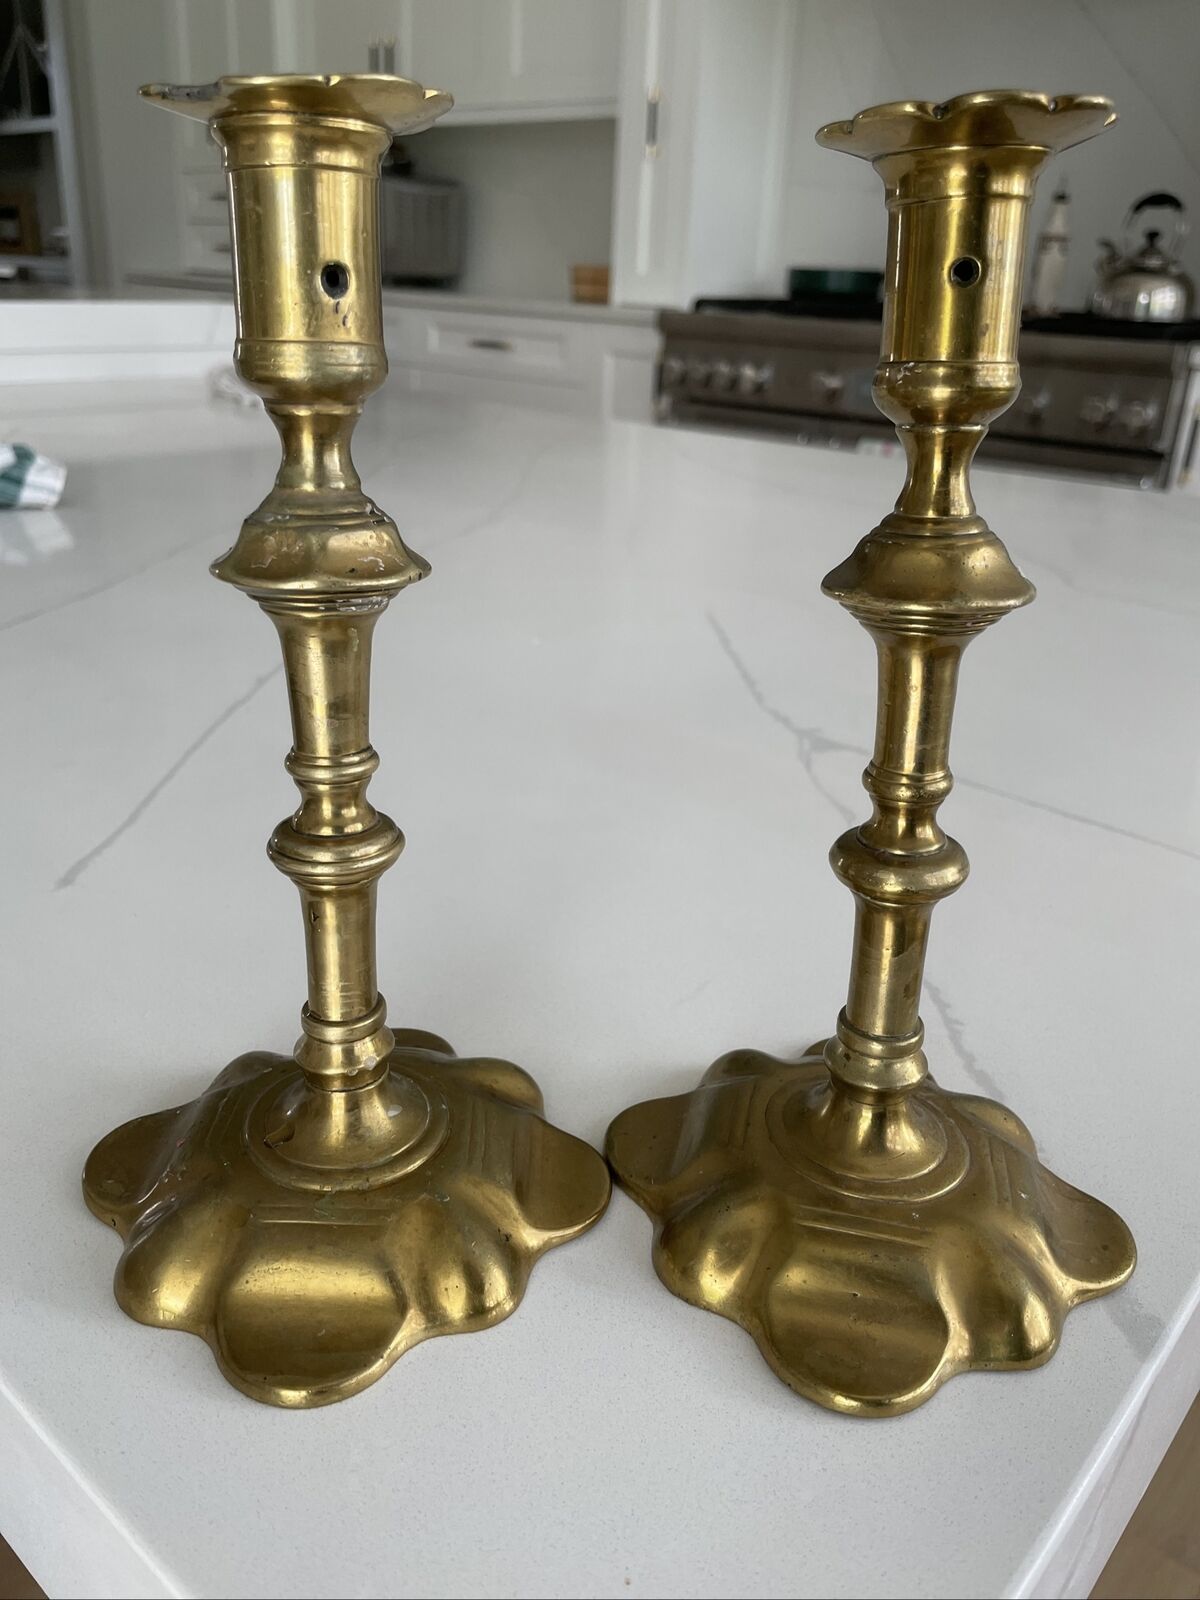 Antique 18th Century George II (?) English Brass Petal Base / Top Candle Holders